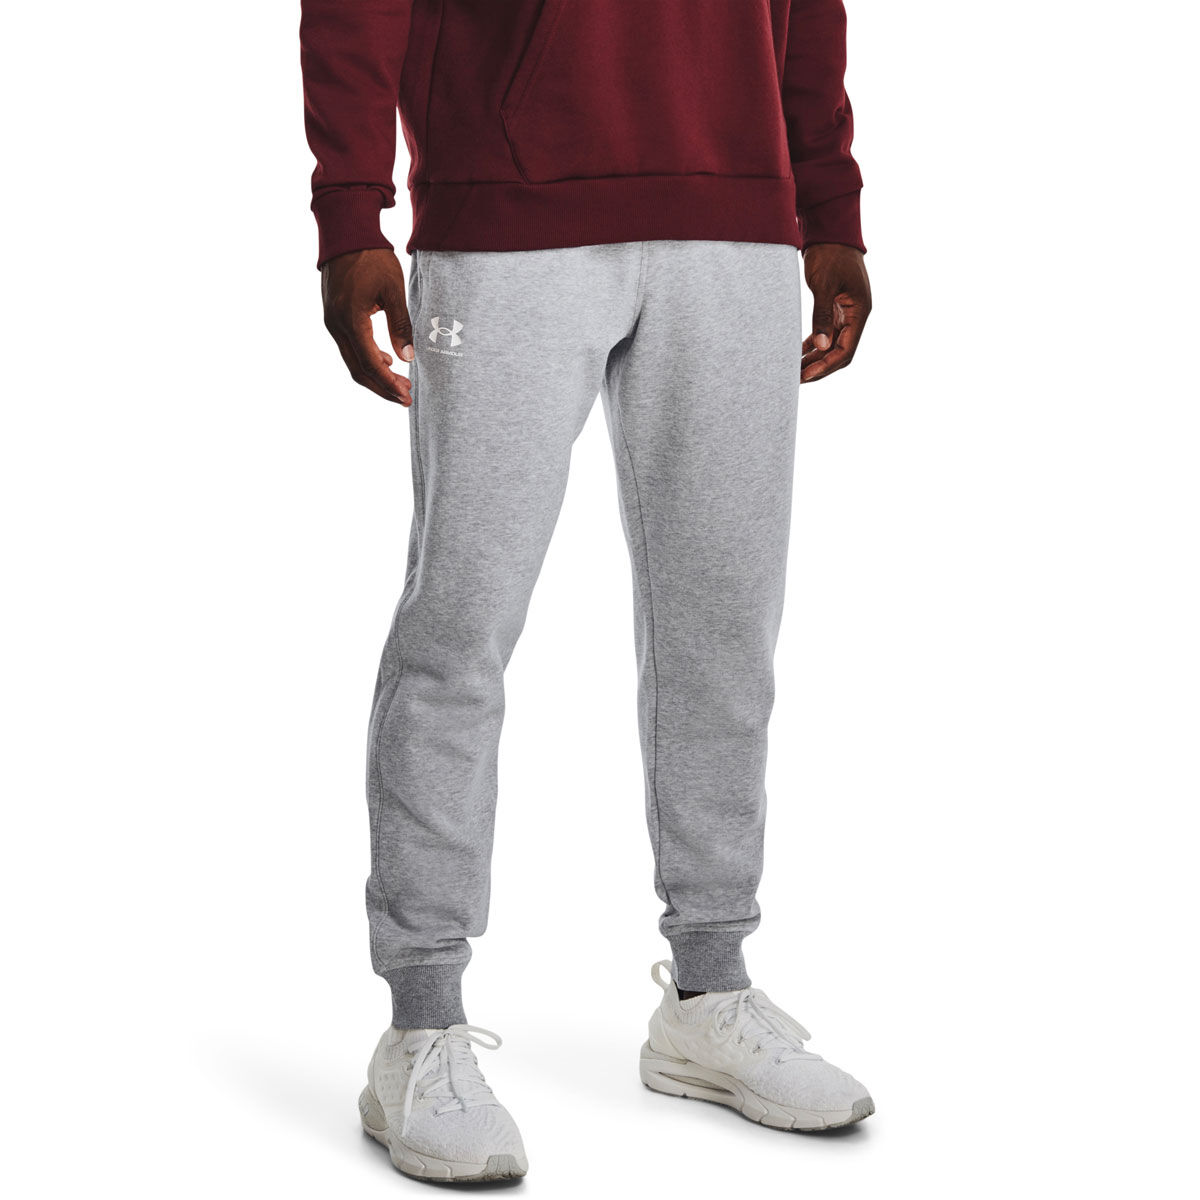 Top more than 142 omtex track pants